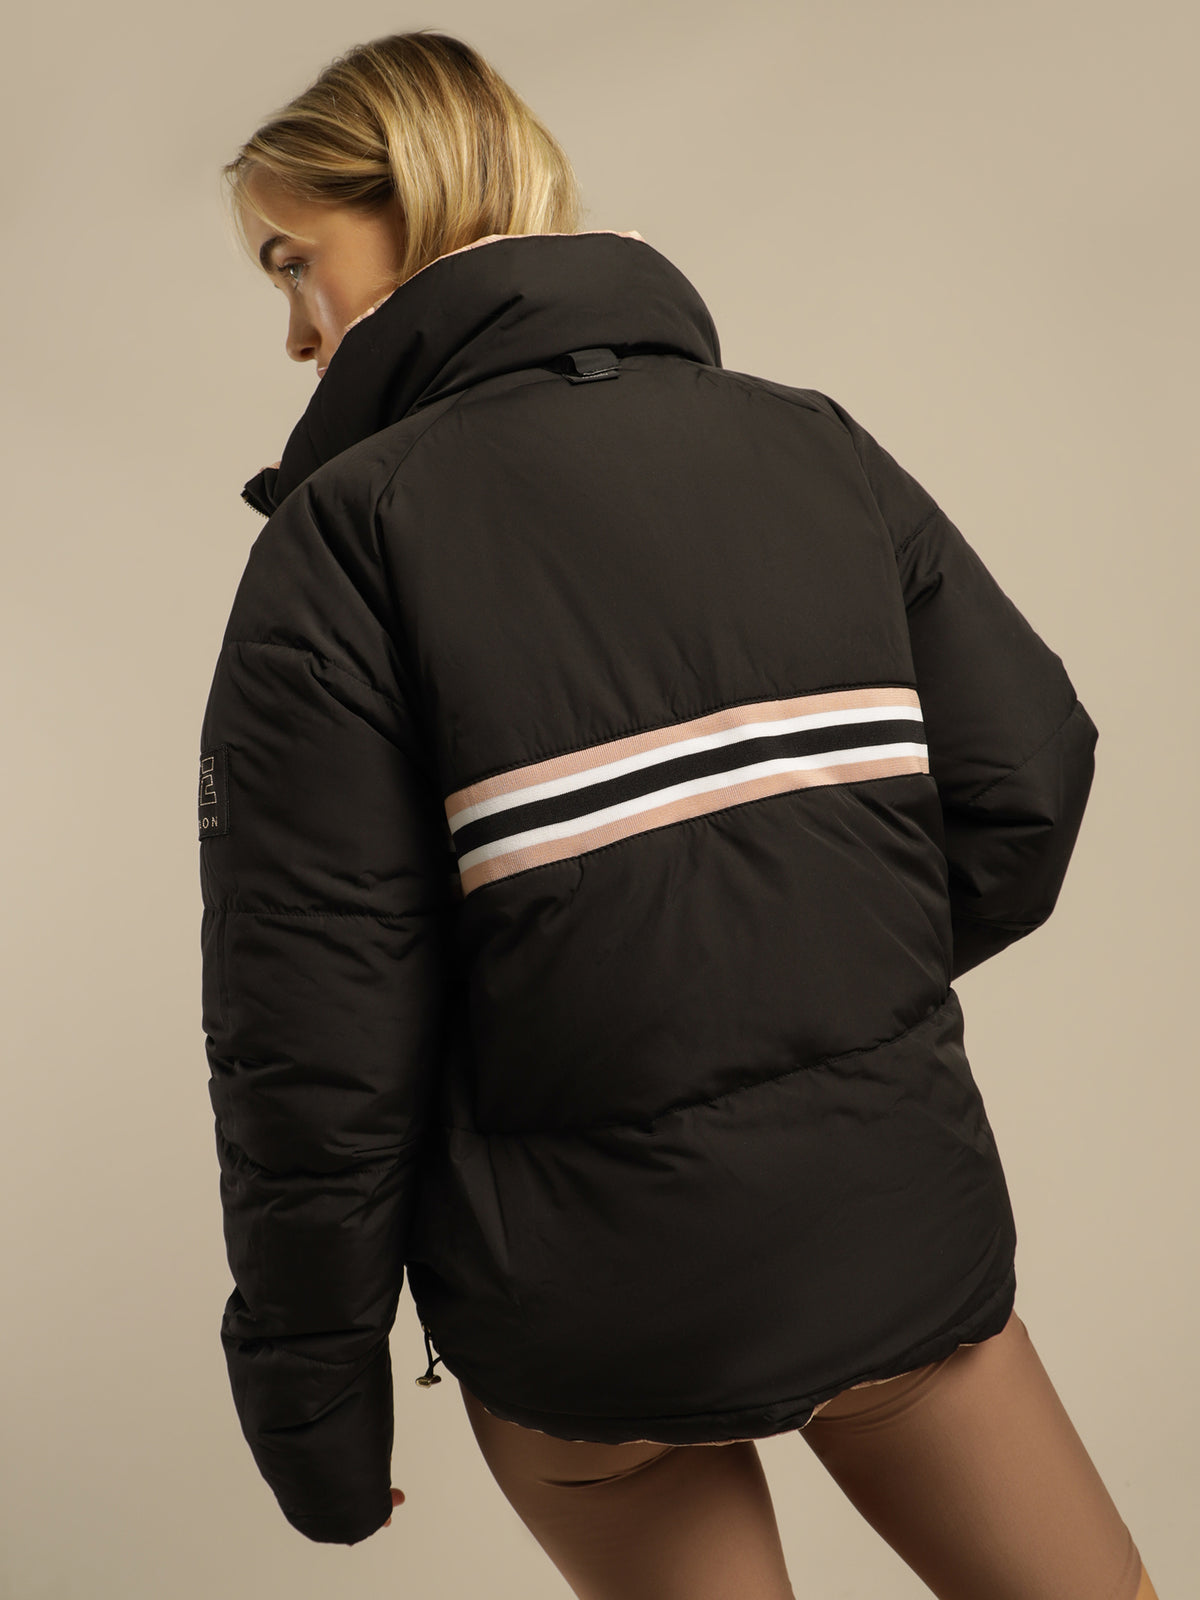 Extra Time Reversible Jacket in Sirocco